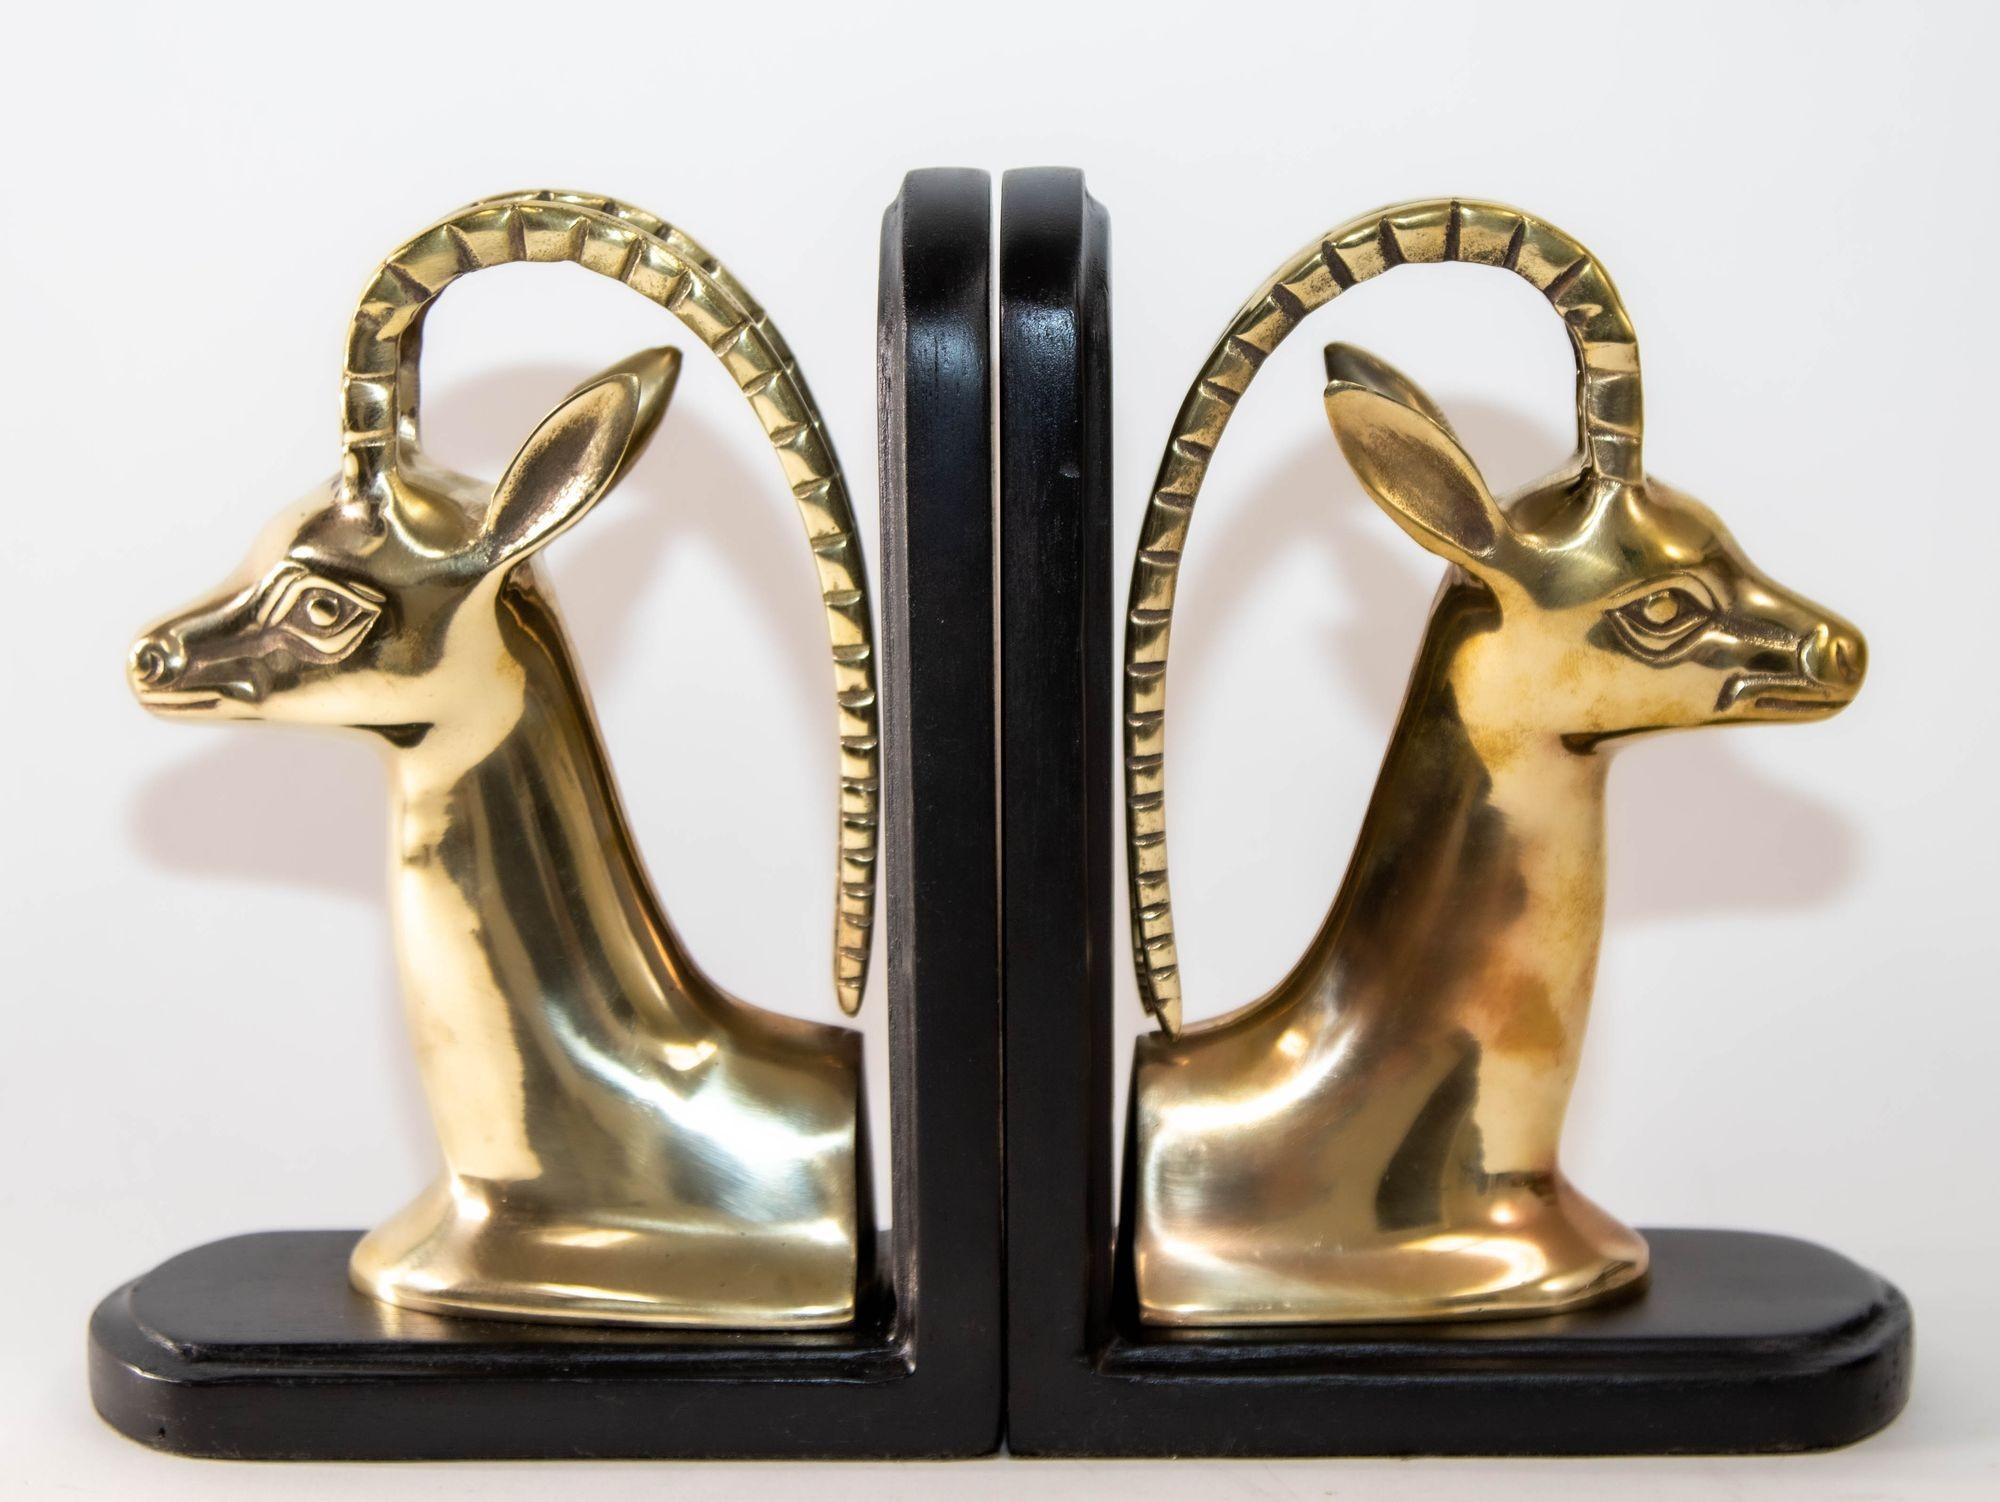 1950s Pair Art Deco Revival Polished Brass Gazelle Antelope Mount Bookends For Sale 7